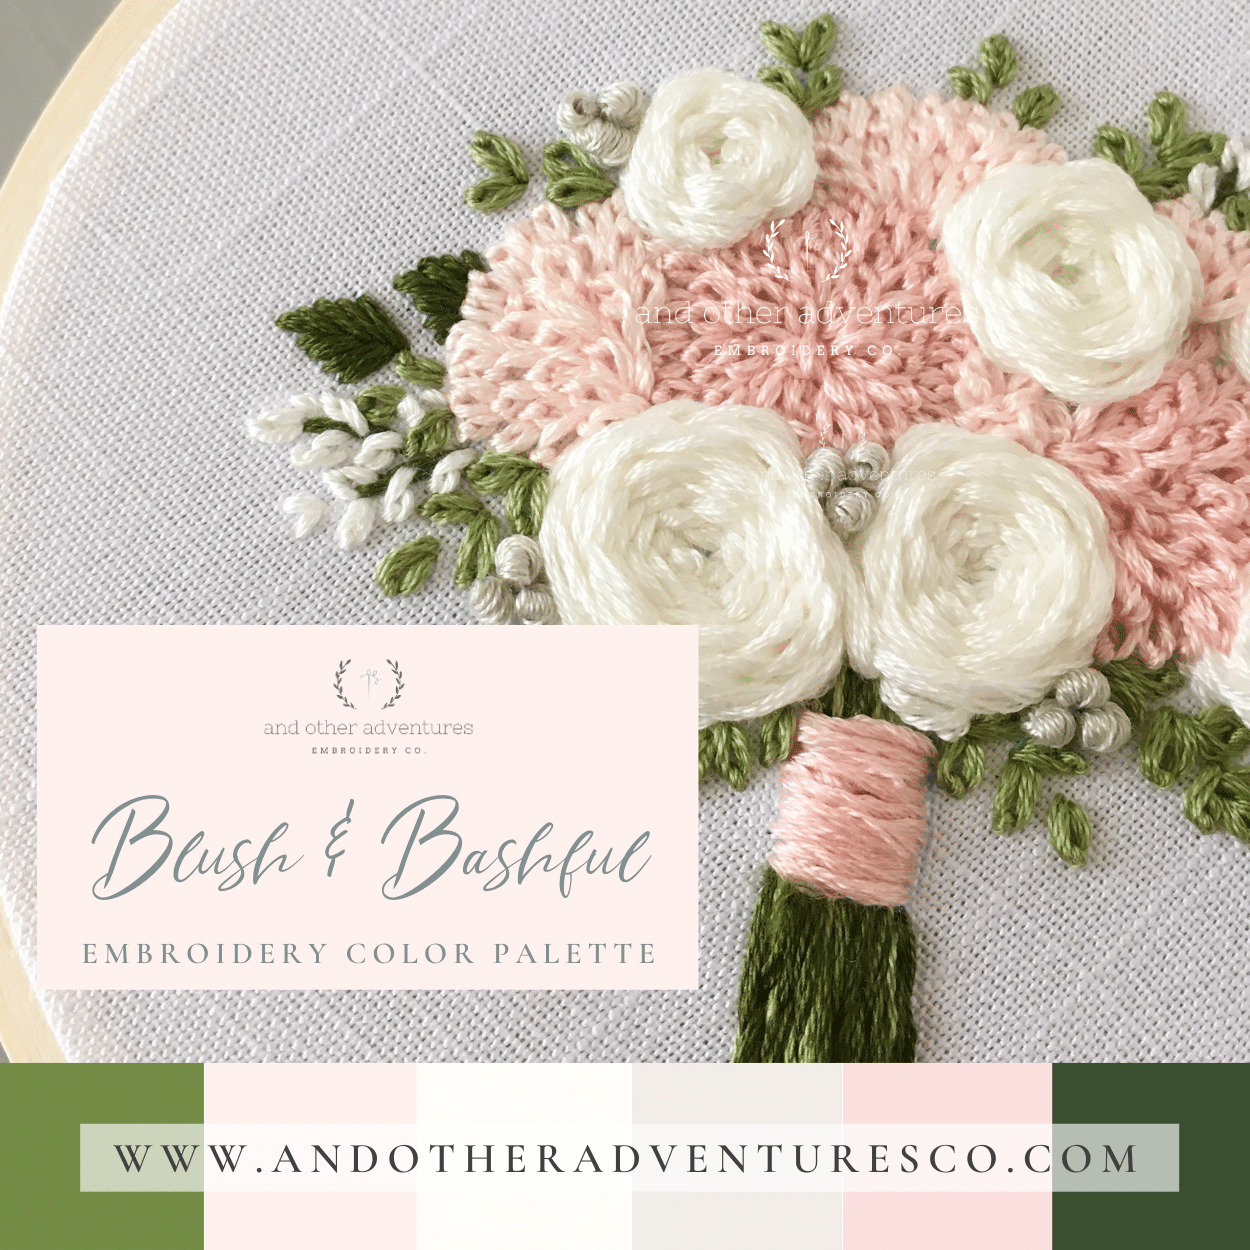 Blush & Bashful Hand Embroidery Color Palette by And Other Adventures Embroidery Co